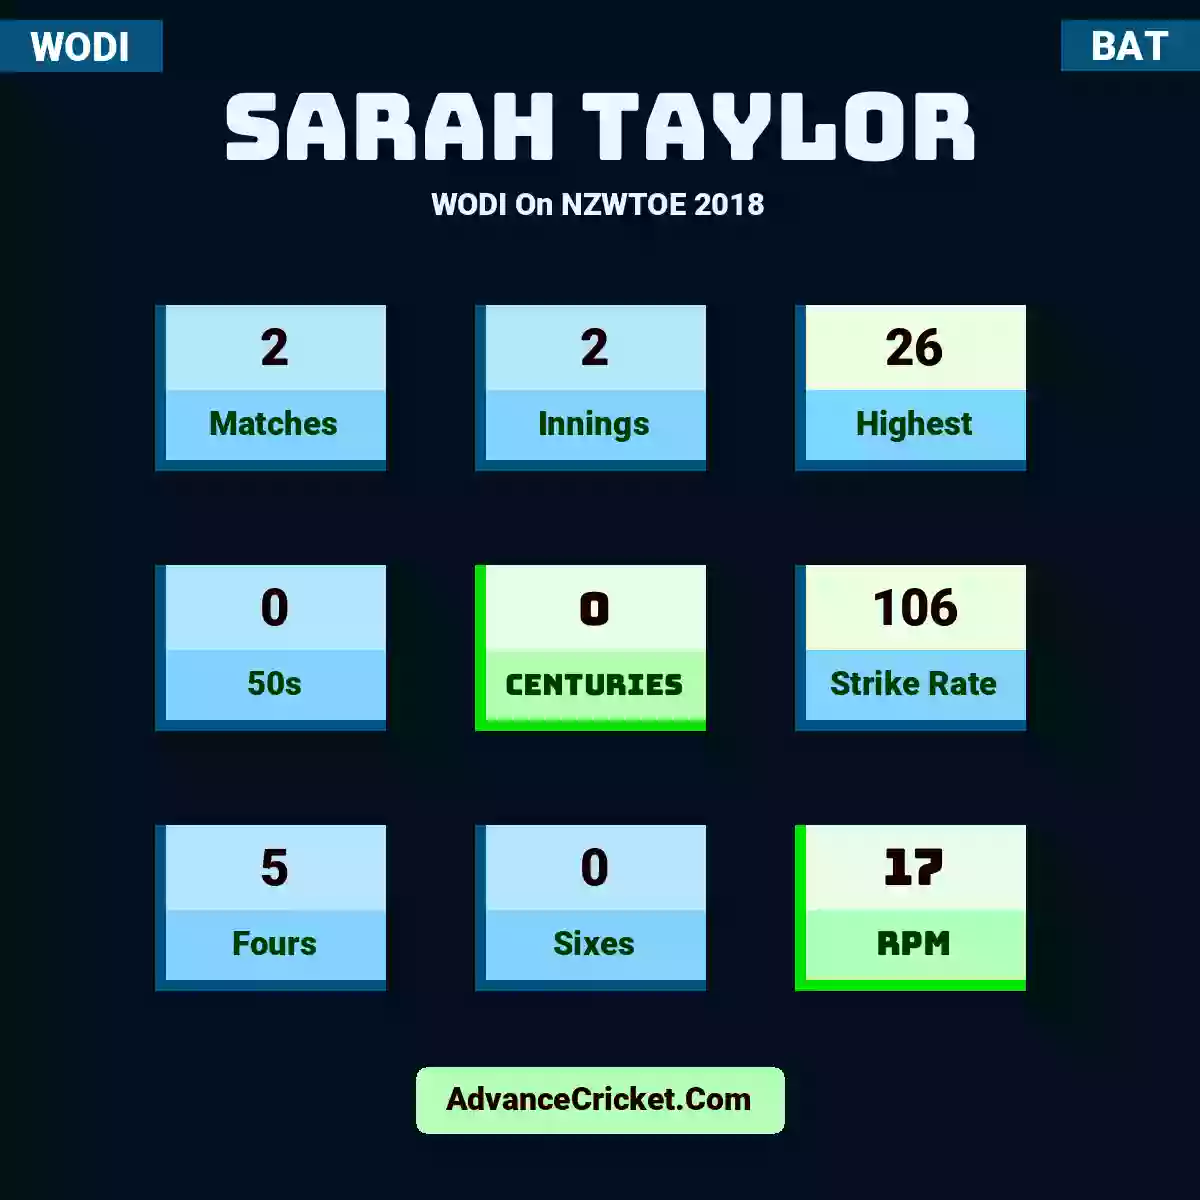 Sarah Taylor WODI  On NZWTOE 2018, Sarah Taylor played 2 matches, scored 26 runs as highest, 0 half-centuries, and 0 centuries, with a strike rate of 106. S.Taylor hit 5 fours and 0 sixes, with an RPM of 17.